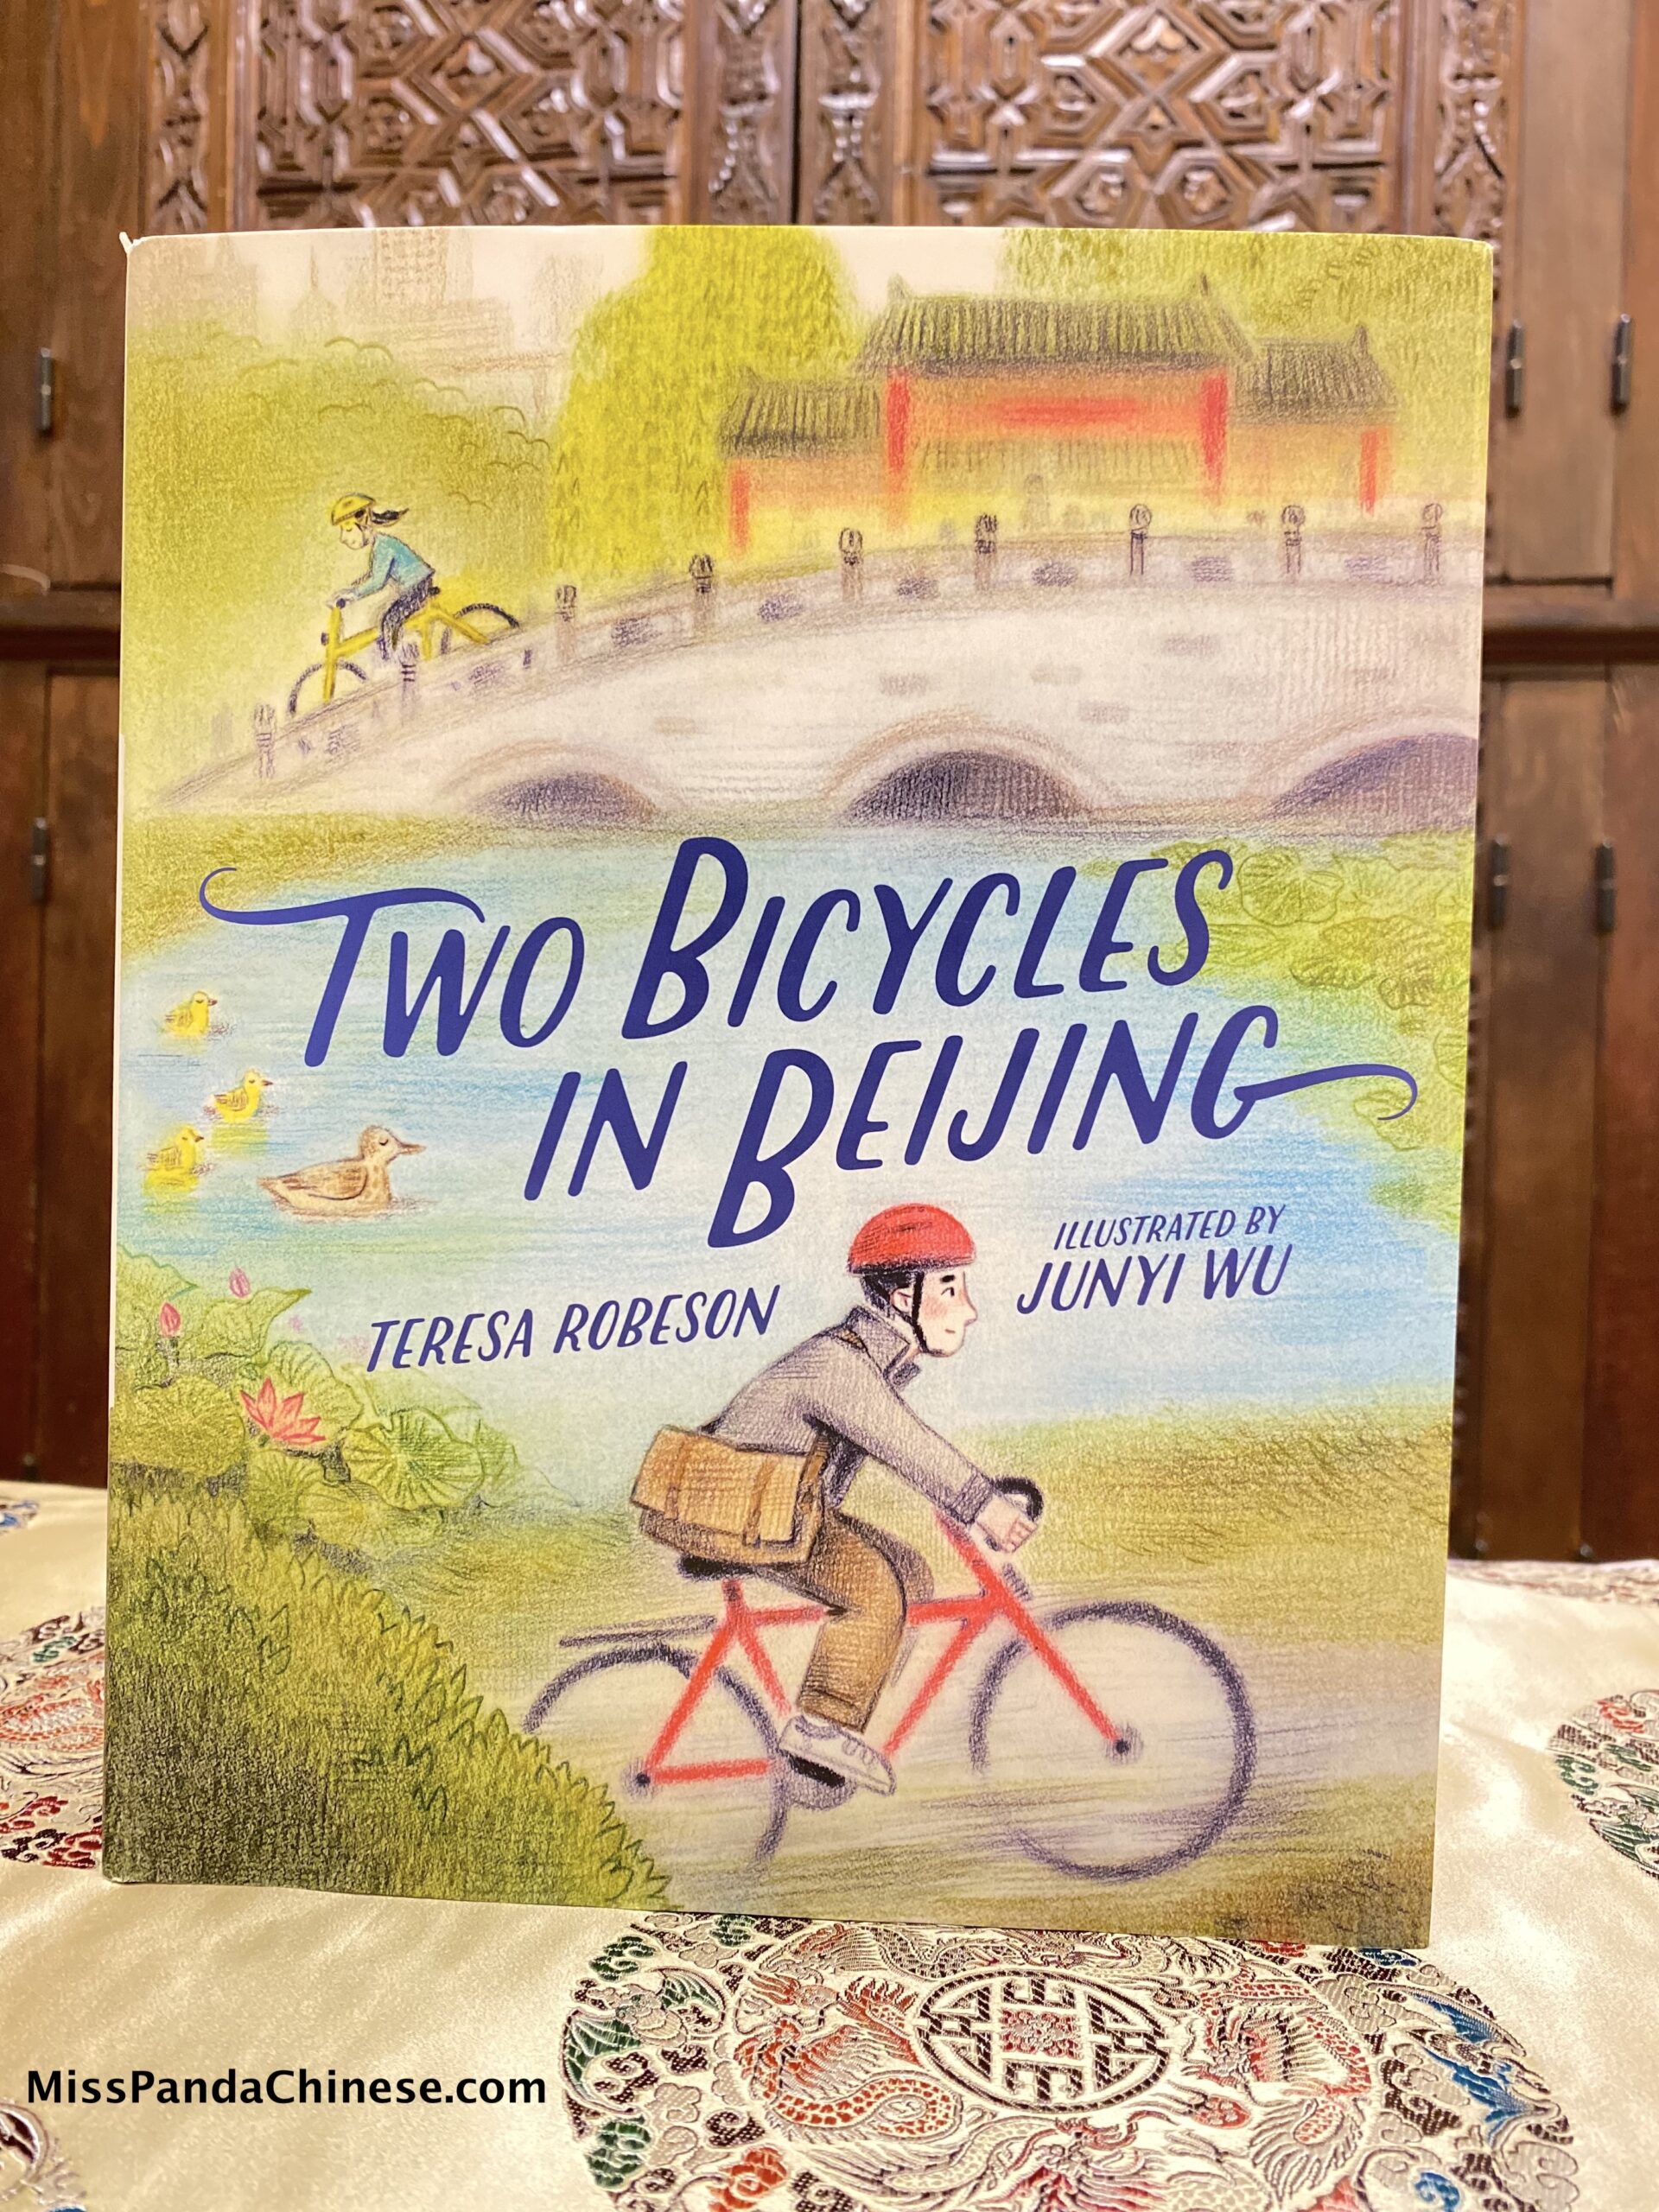 Two Bicycles In Beijing book review by MissPandaChinese.com